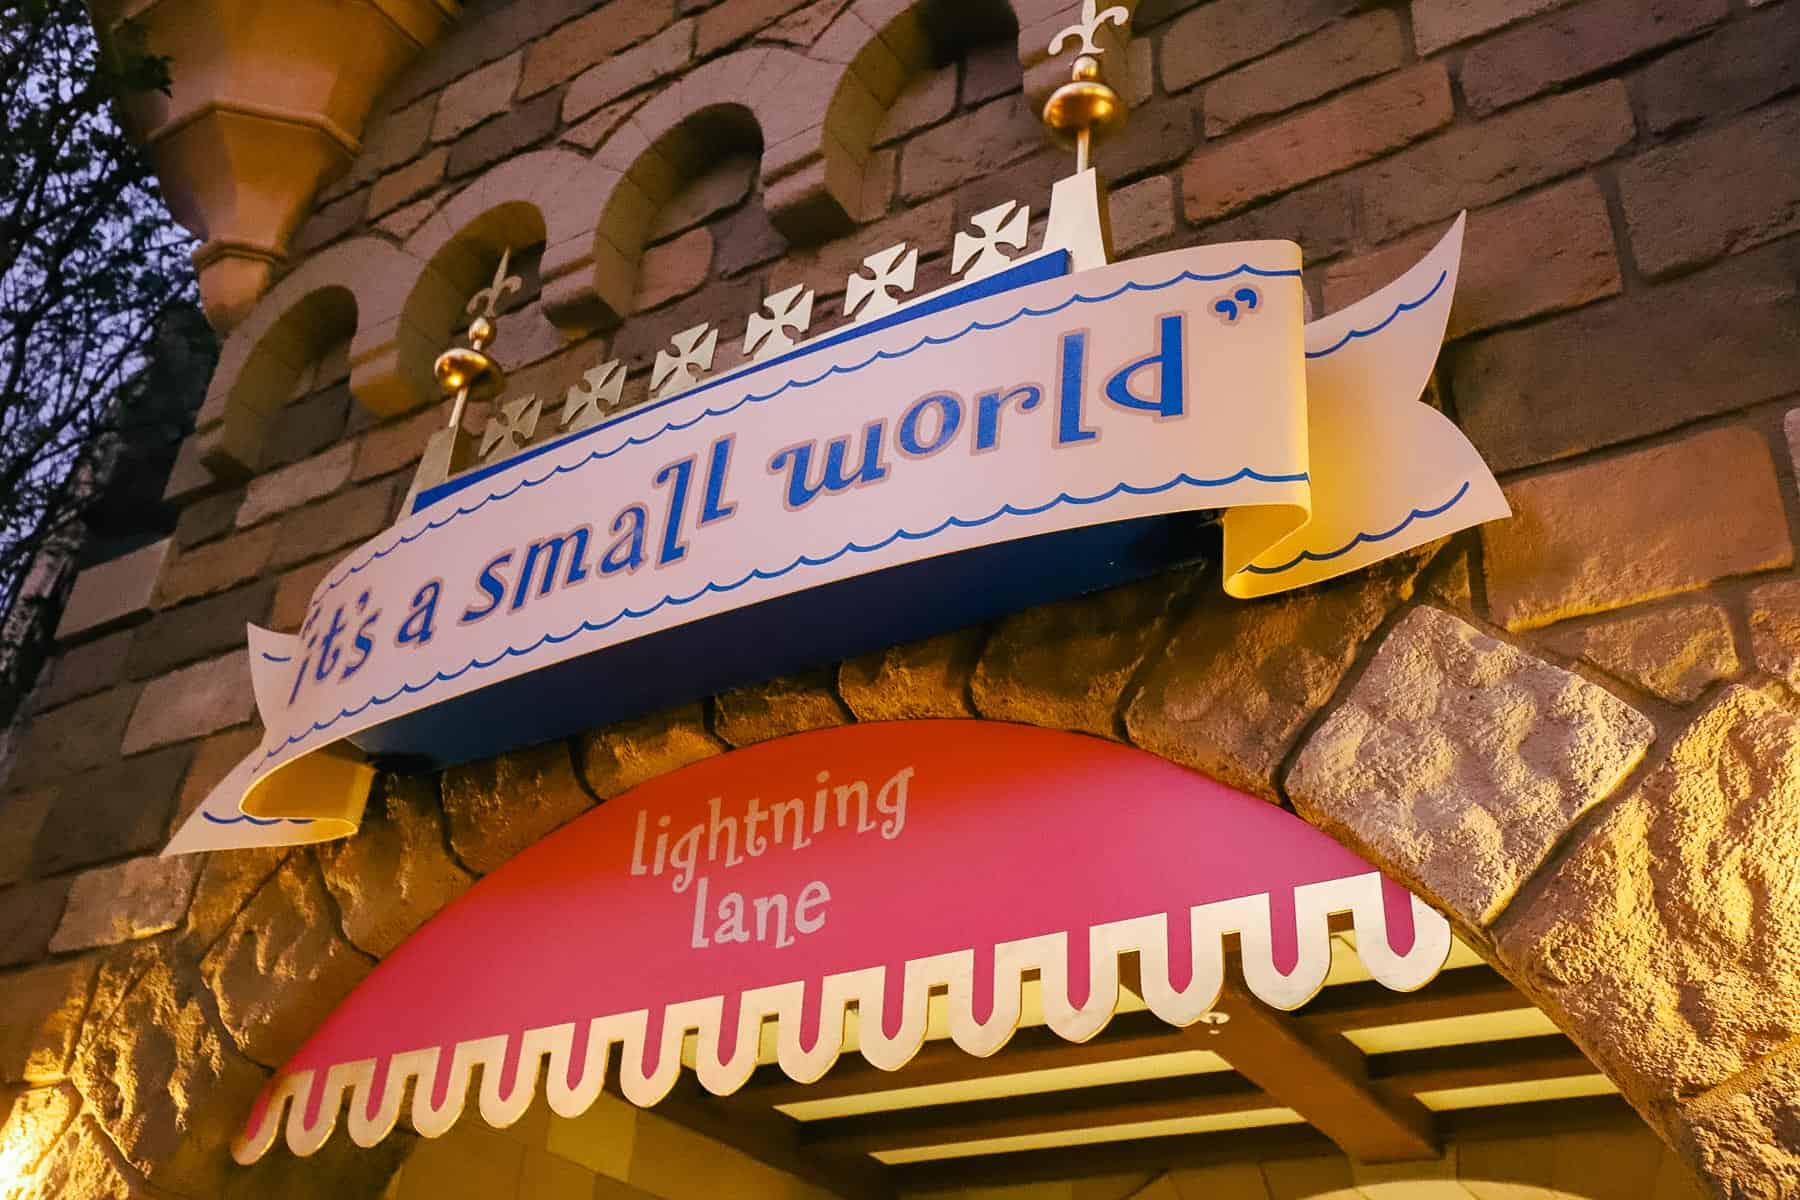 Lightning Lane entrance for "it's a small world" 